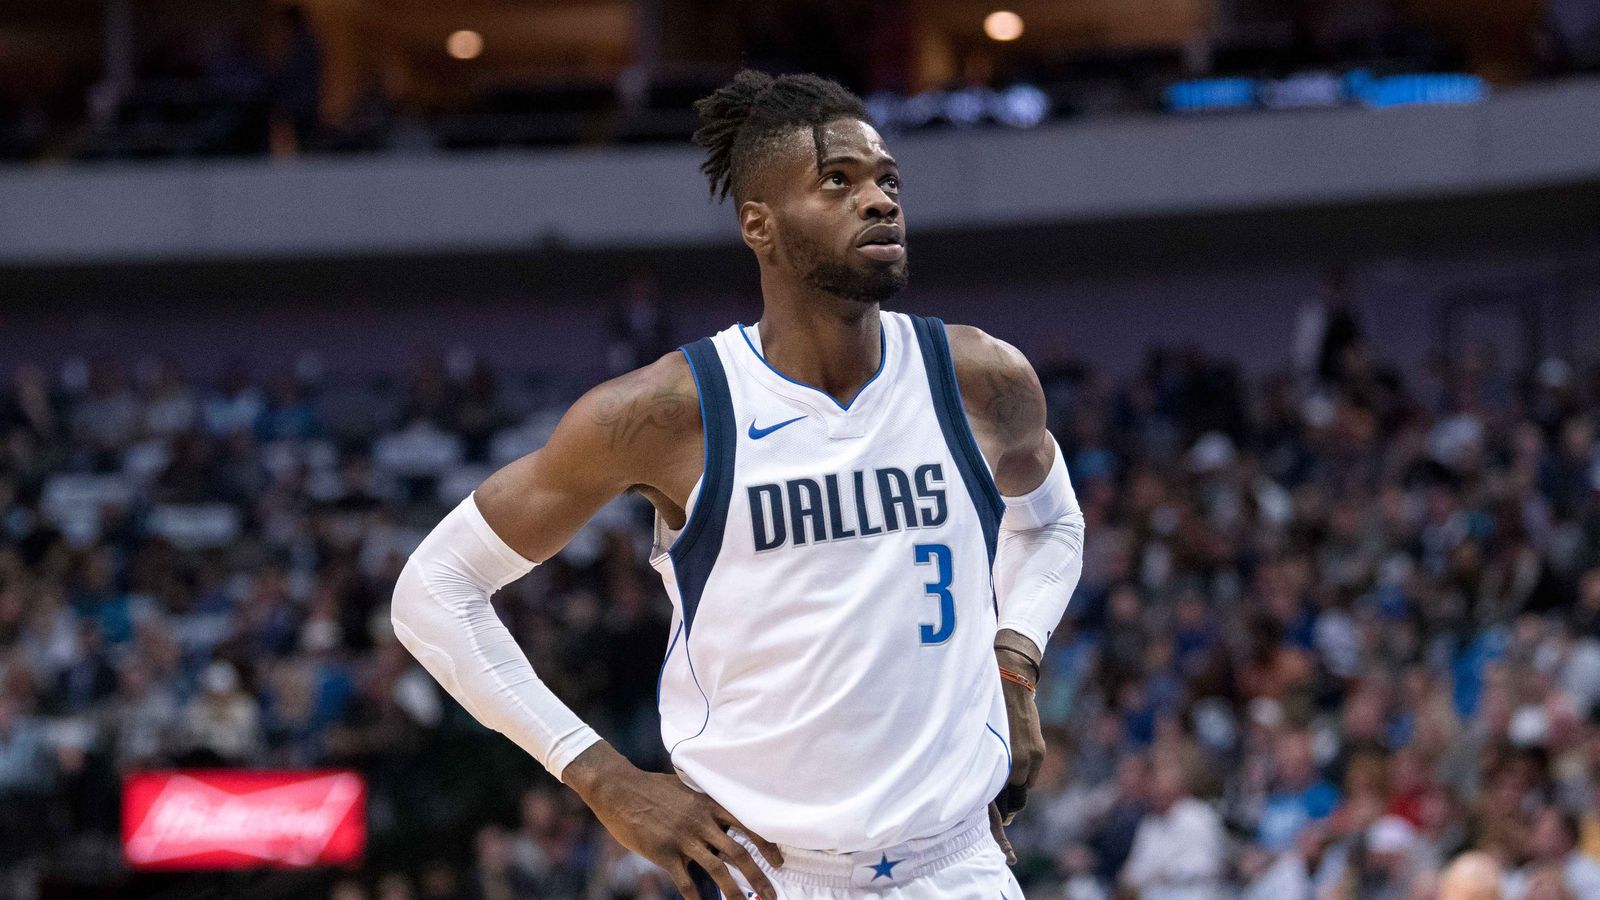 Nerlens Noel on Everett roots, his love of KG and dealing with